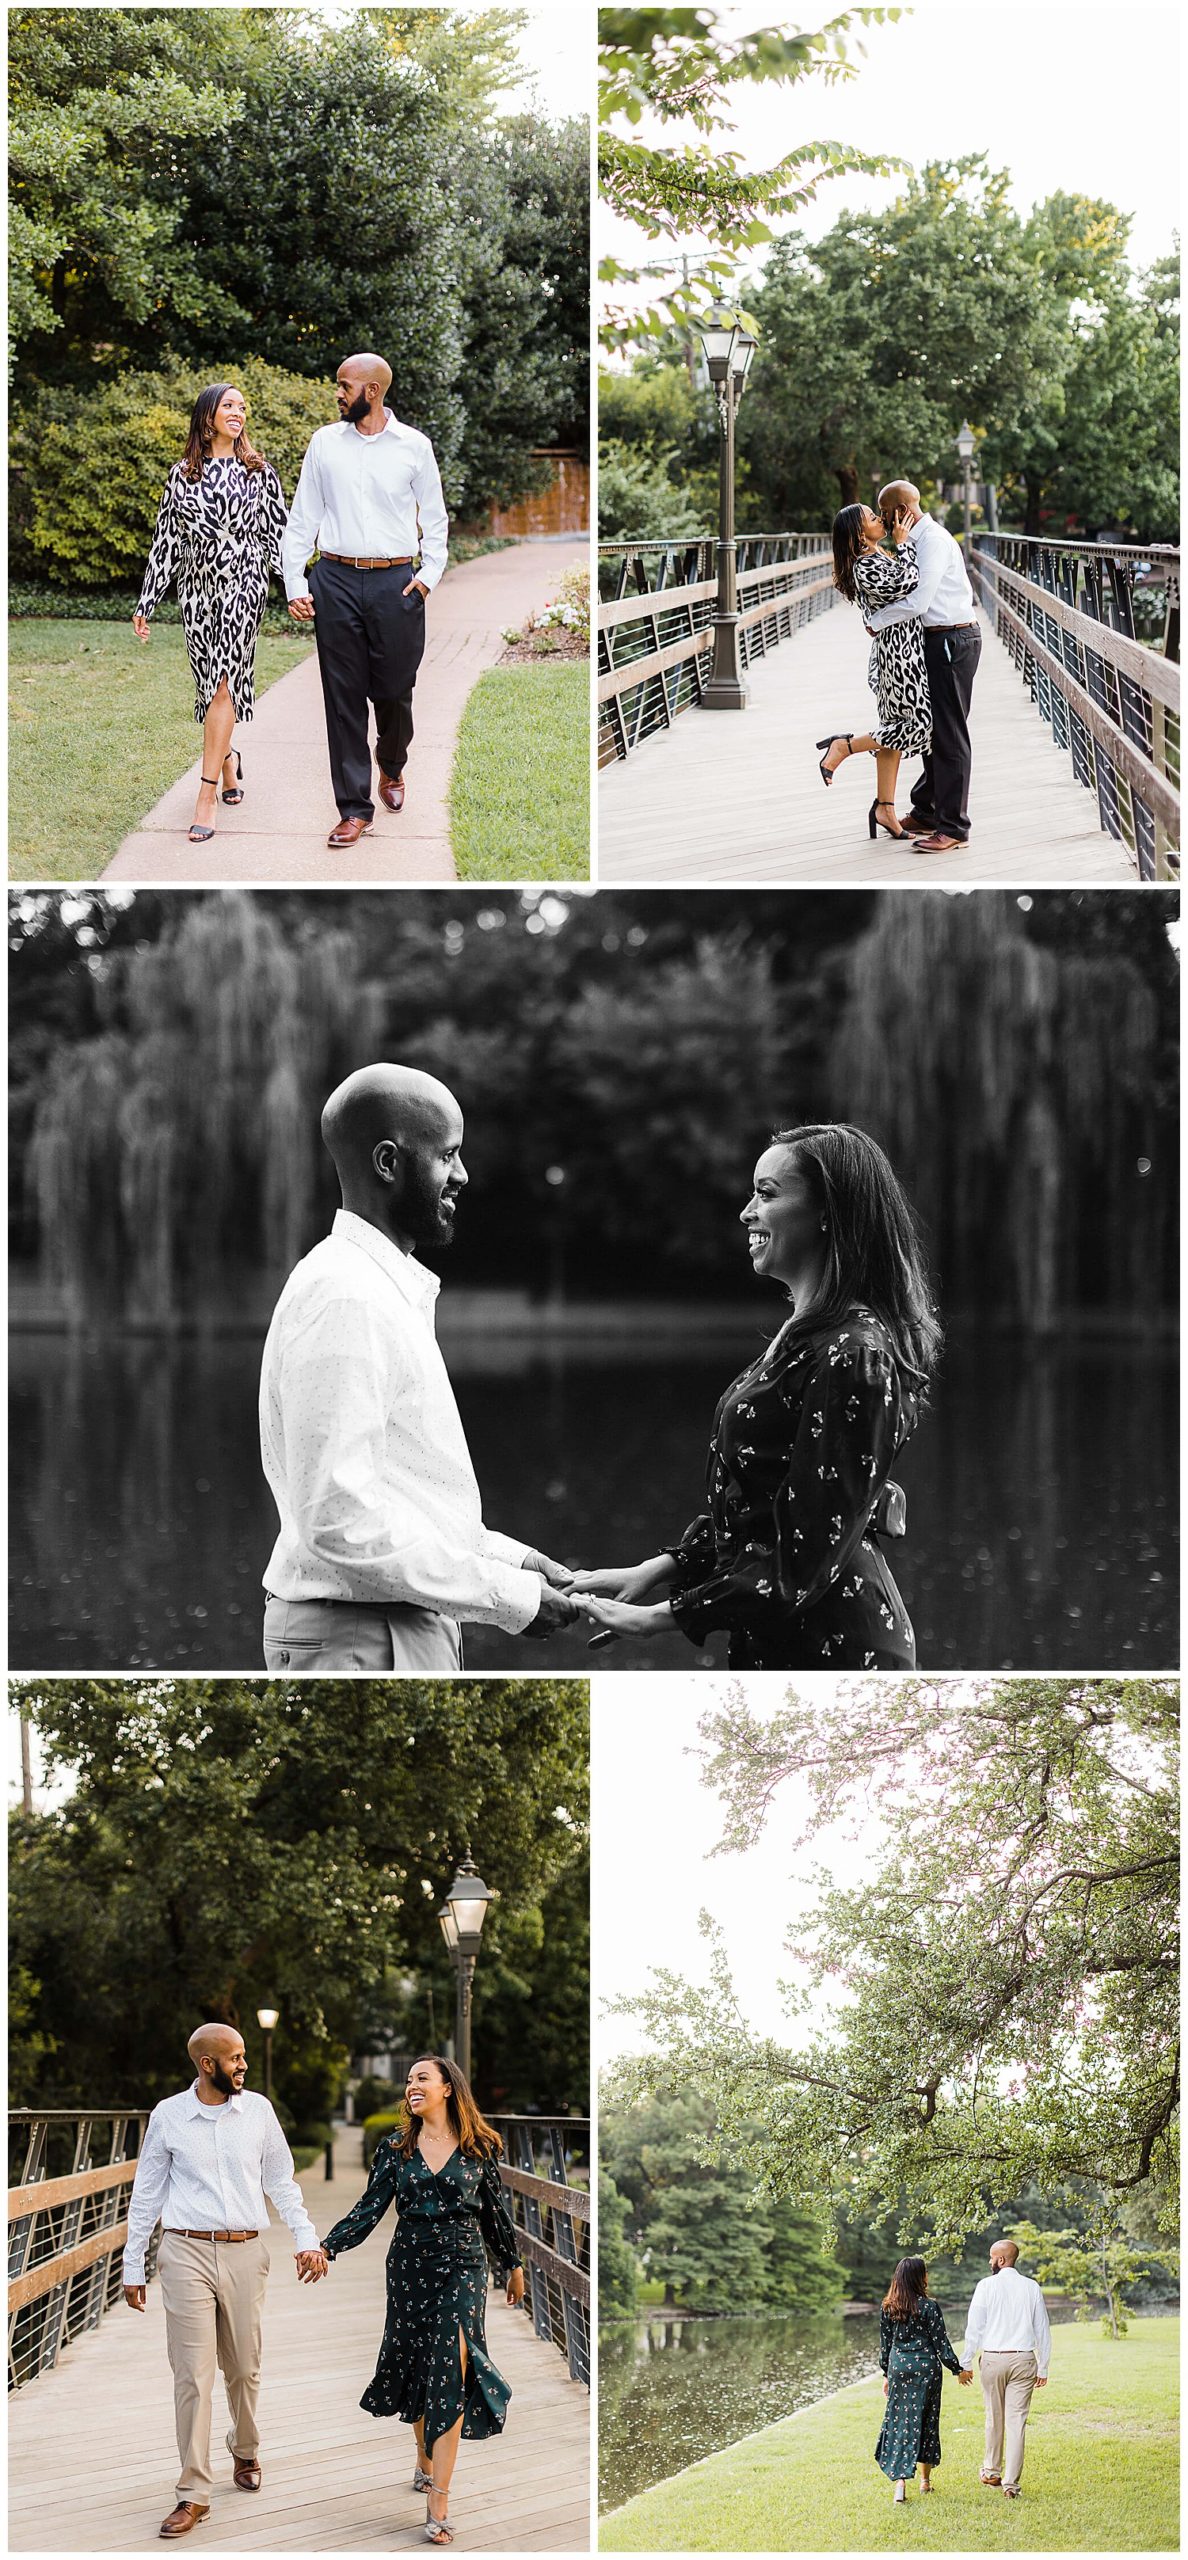 Engagement session at Lakeside Park in Dallas